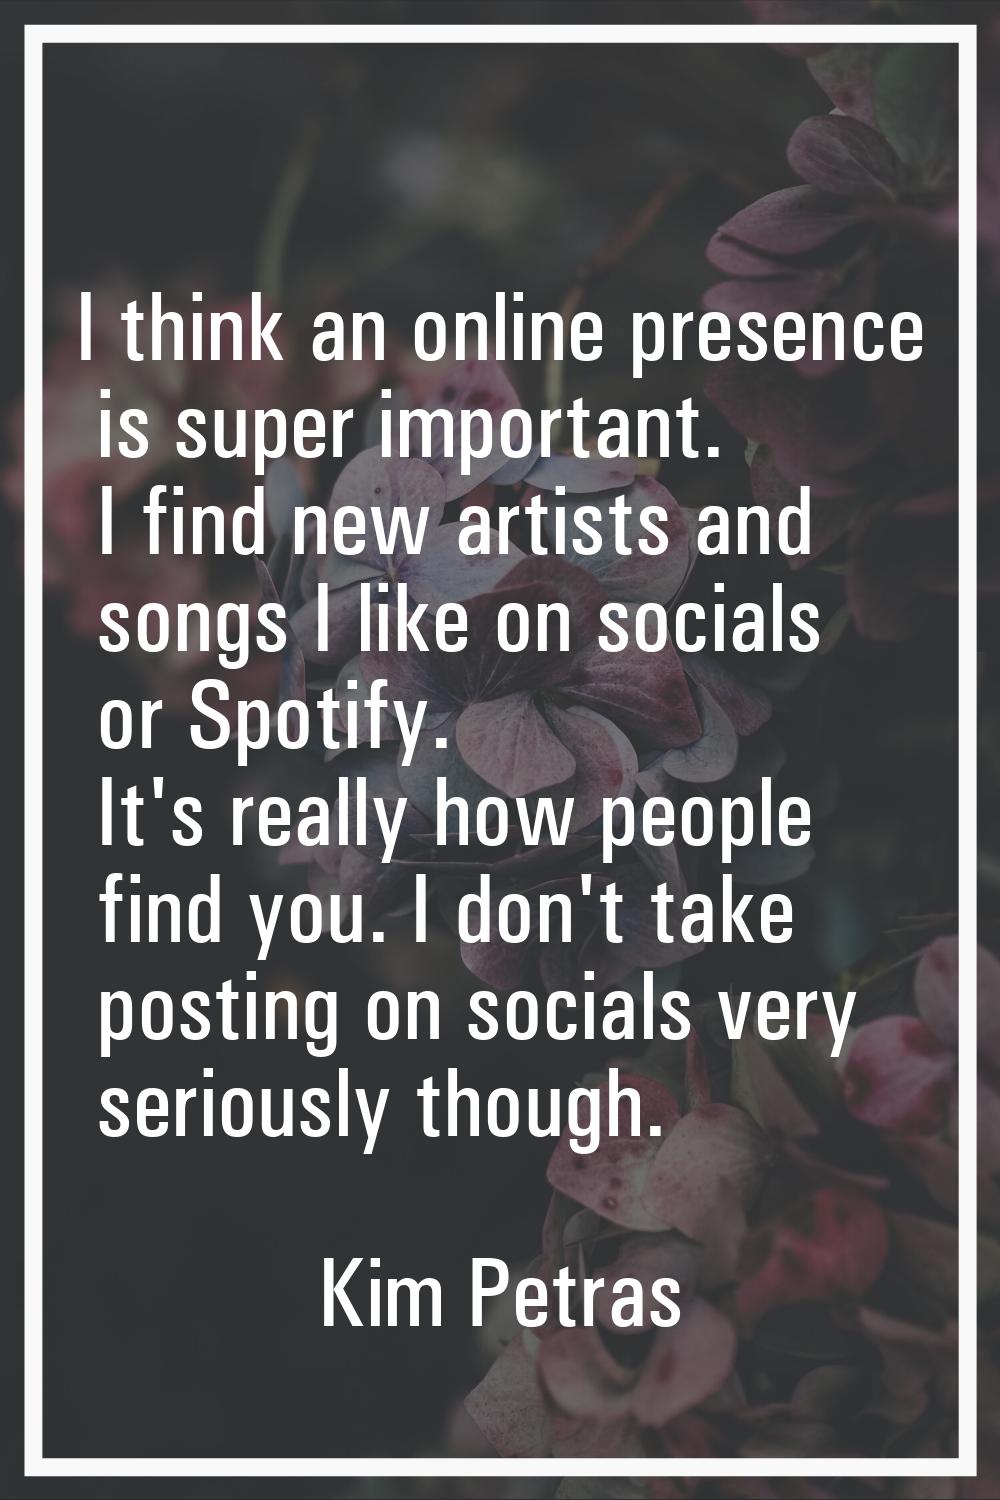 I think an online presence is super important. I find new artists and songs I like on socials or Sp